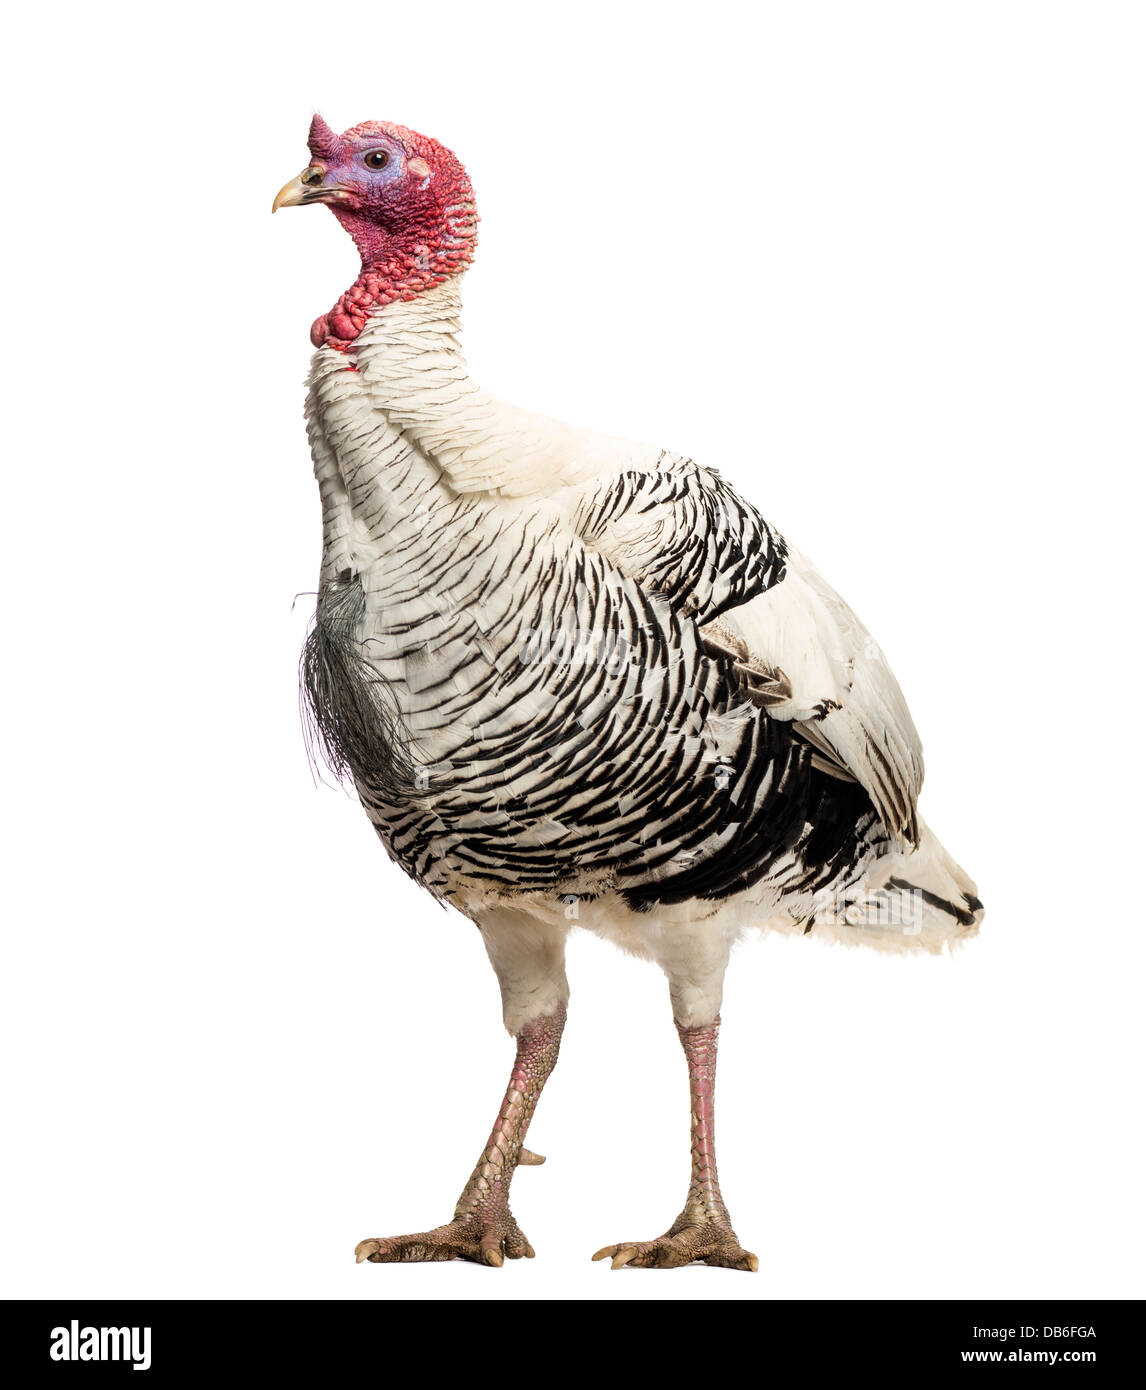 Wild Turkey, Meleagris gallopavo, standing against white background Banque D'Images